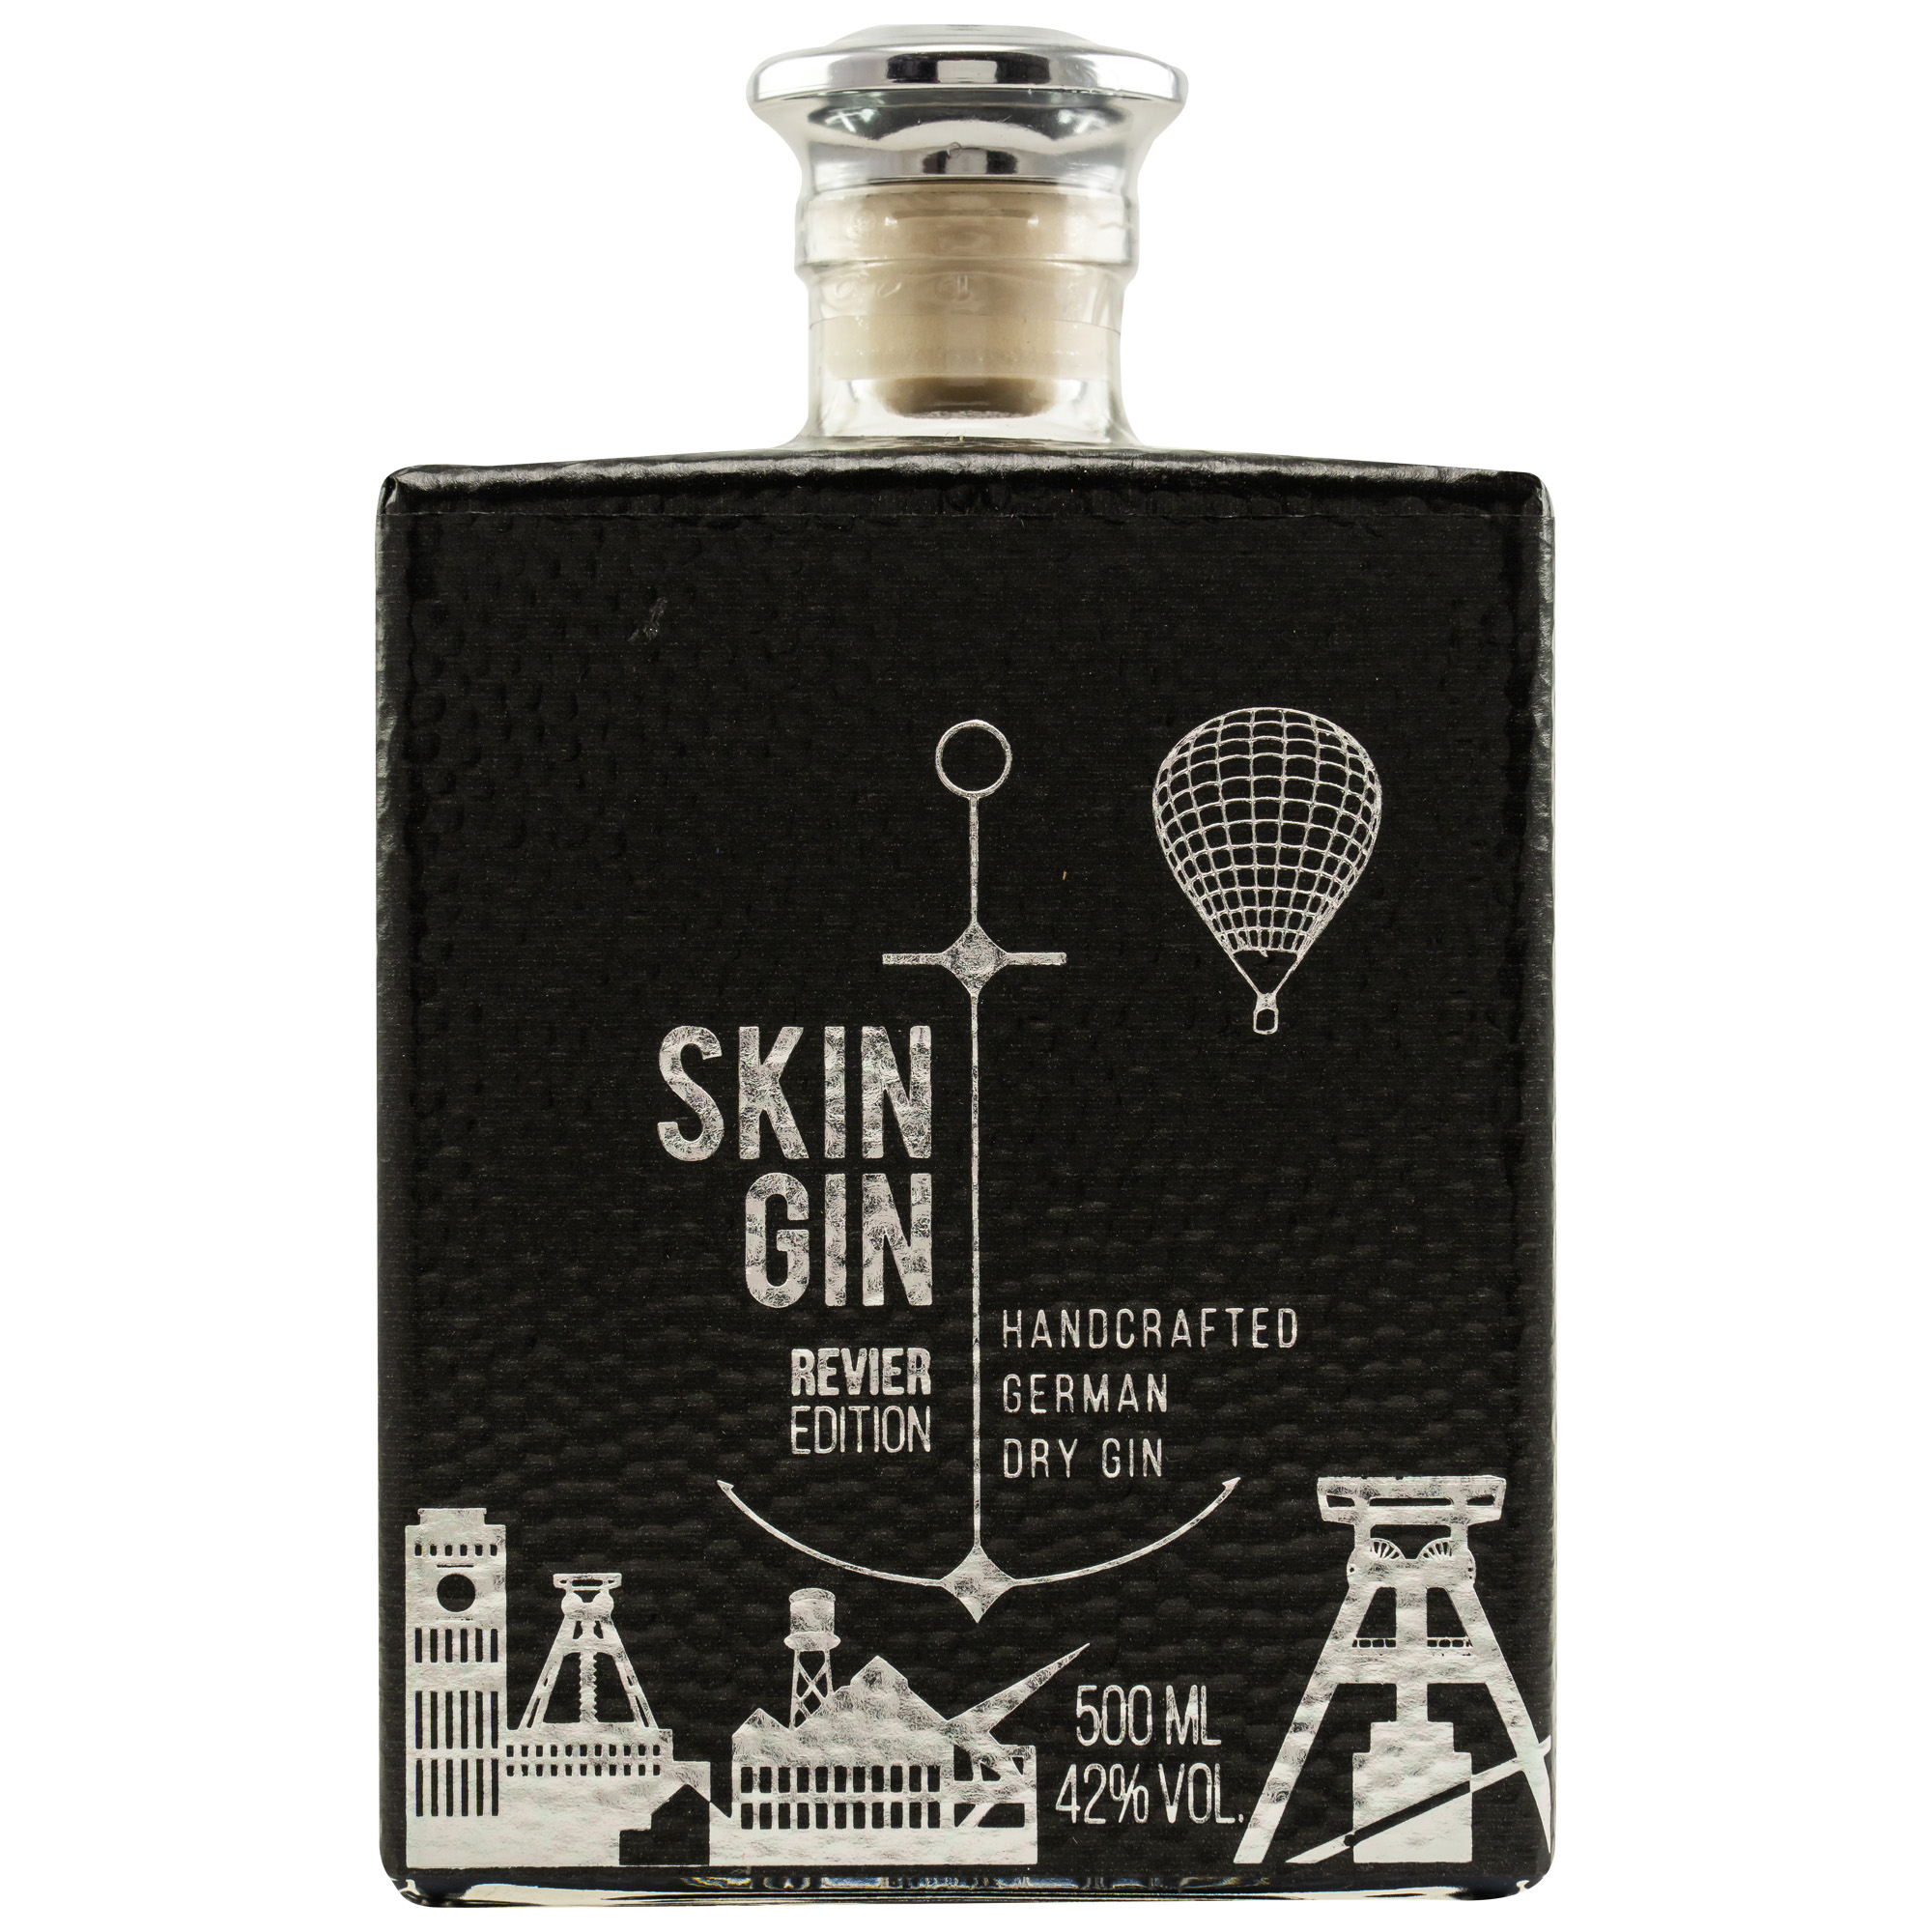 Skin Gin Revier Edition 42% - 0,5l.